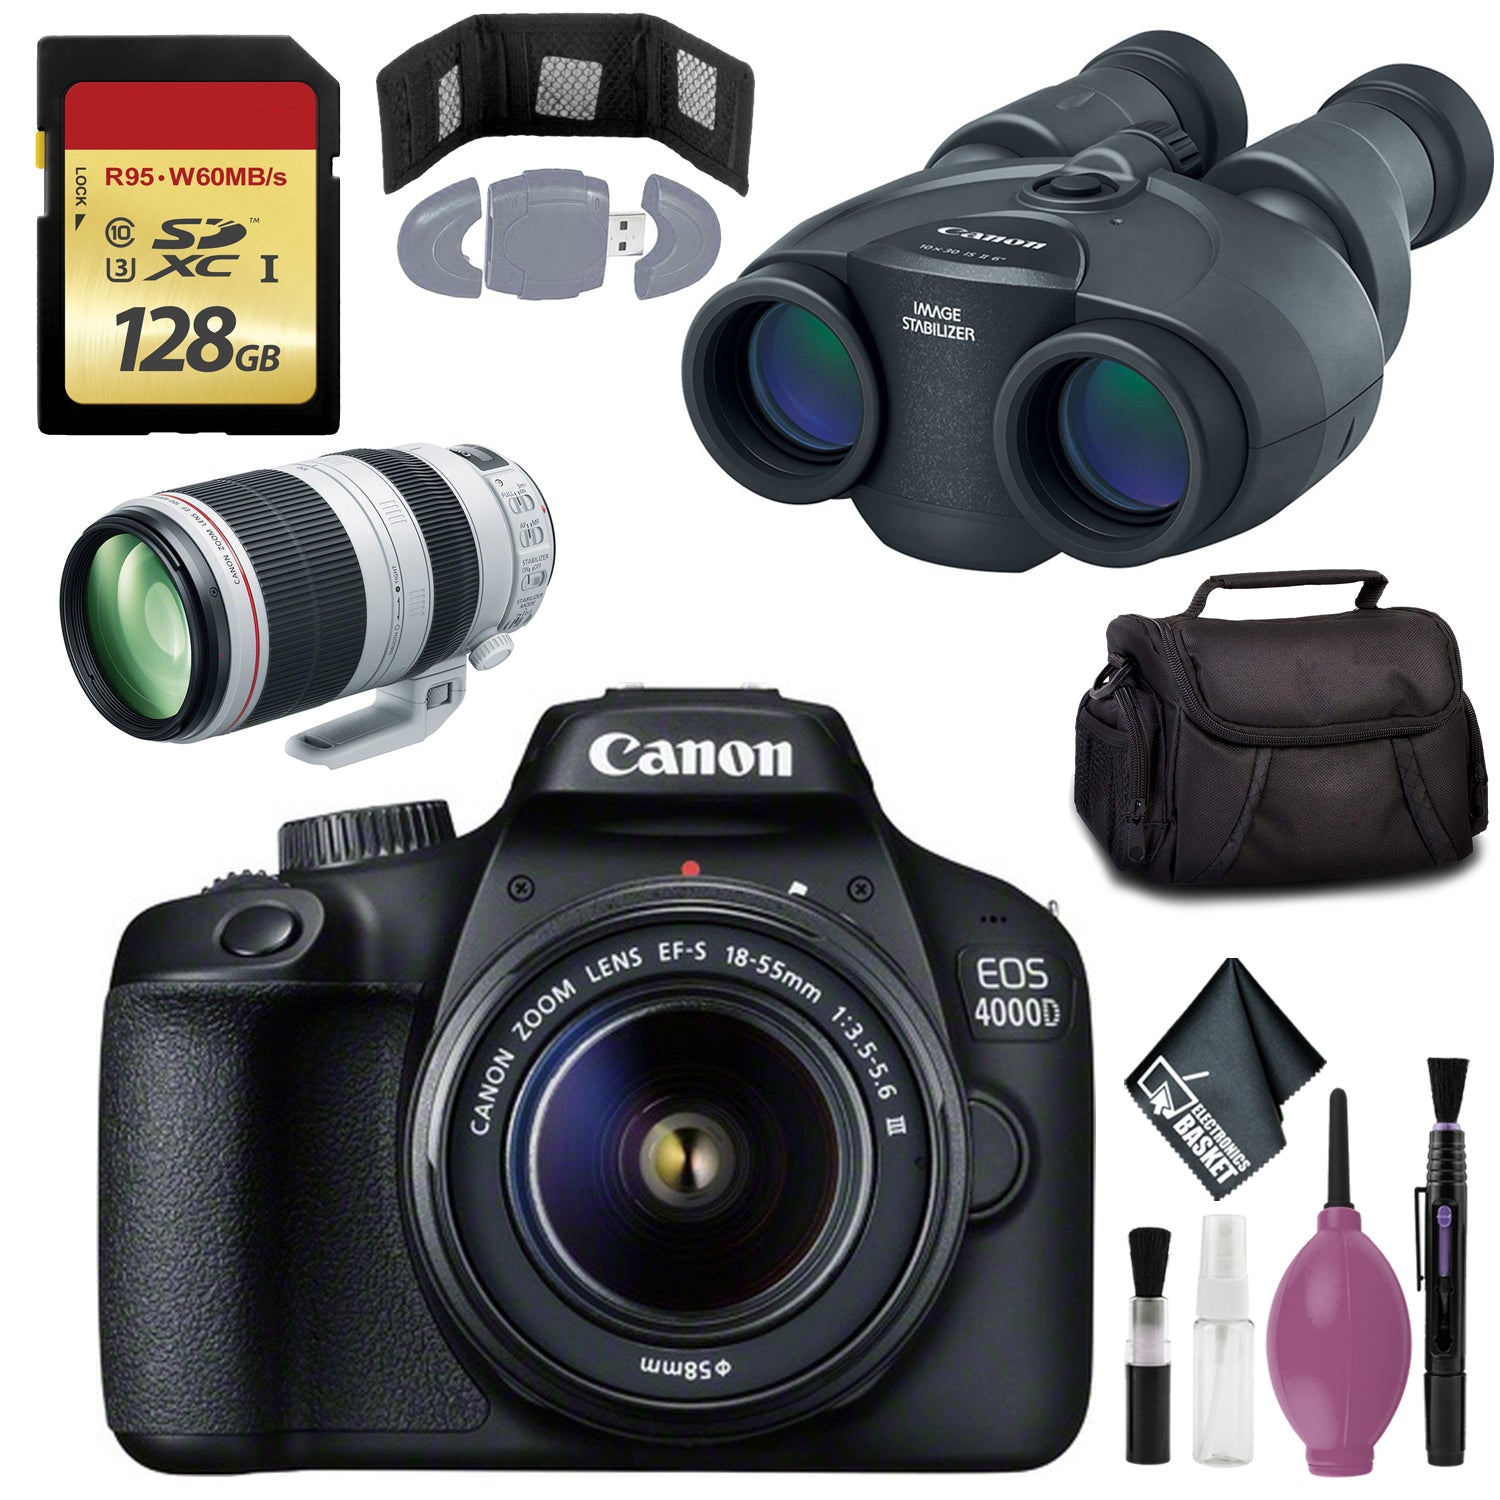 Canon 10x30 IS II Image Stabilized Binocular - Eos 4000D with EF-S 18-55mm f/3.5-5.6 III Lens - 128GB Card